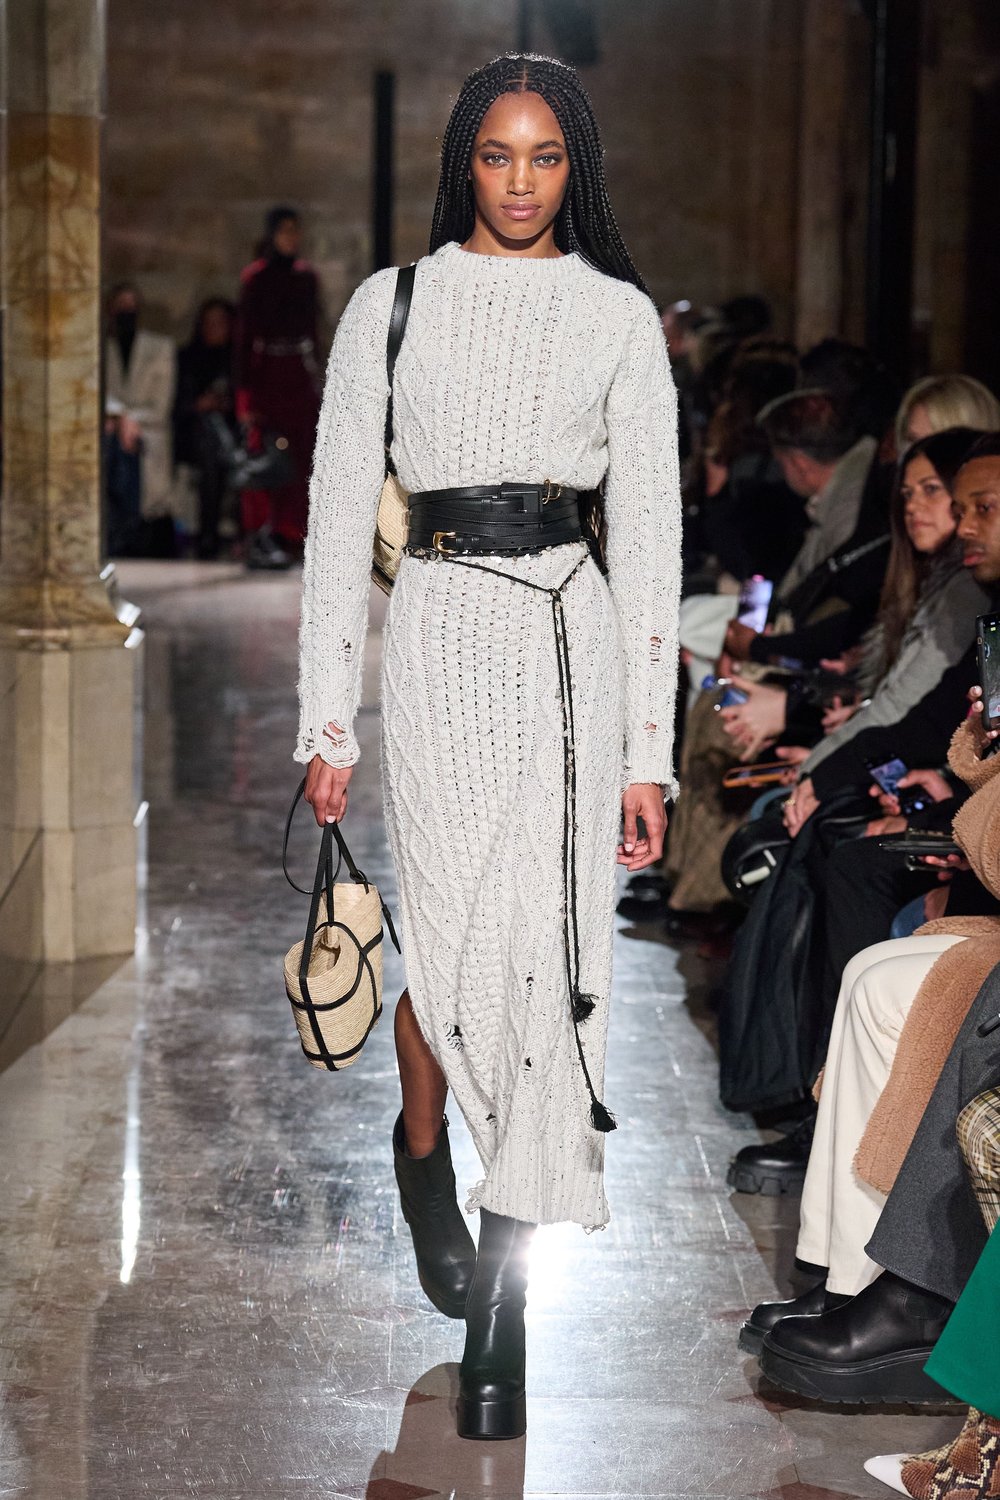 7 trends to watch according to NY Fashion Week Fall 2022 — Marcia Crivorot